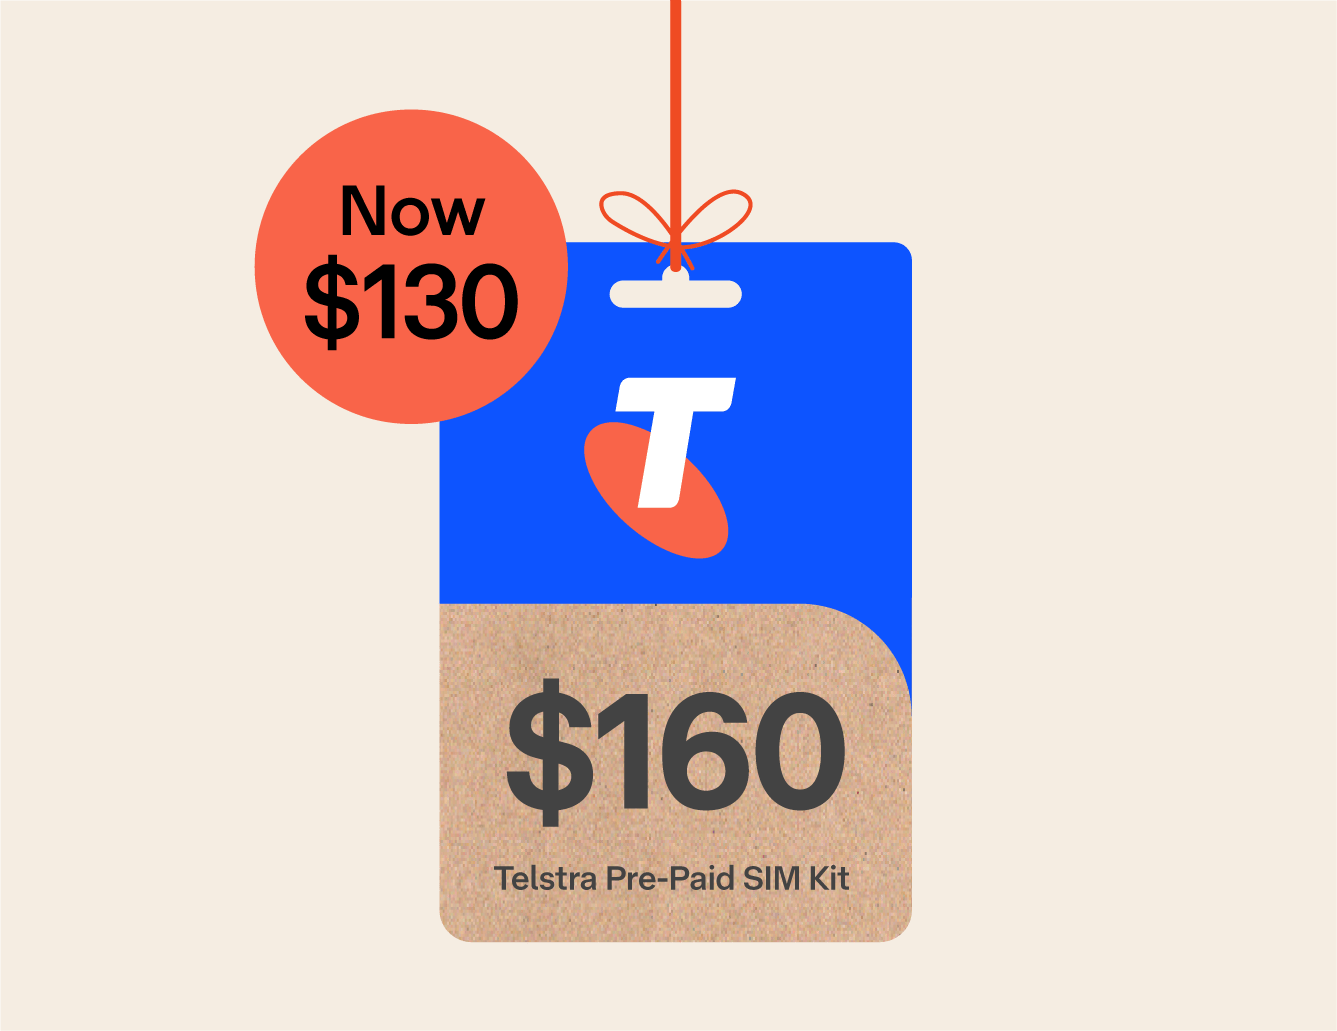 Graphic representation of a $160 Telstra Pre-Paid SIM. Text on image: Now $130.